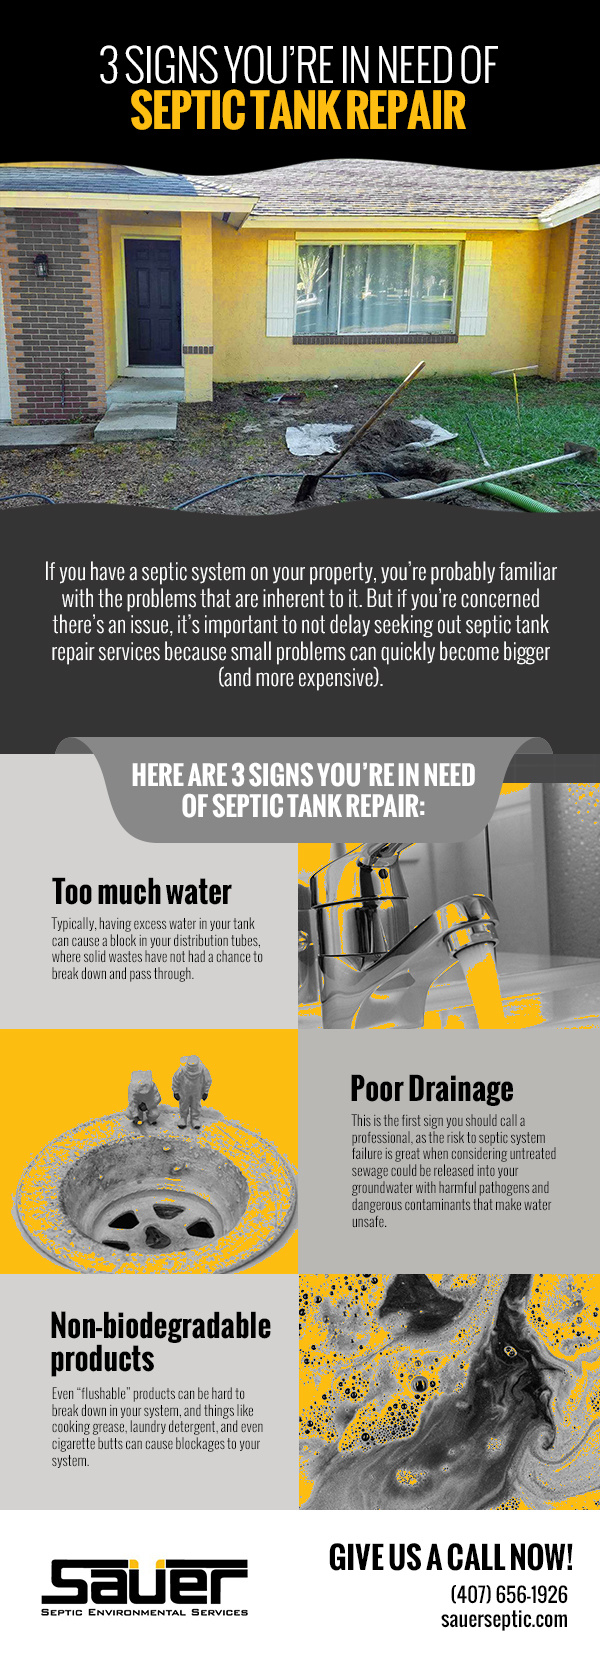 3 Signs You’re In Need of Septic Tank Repair